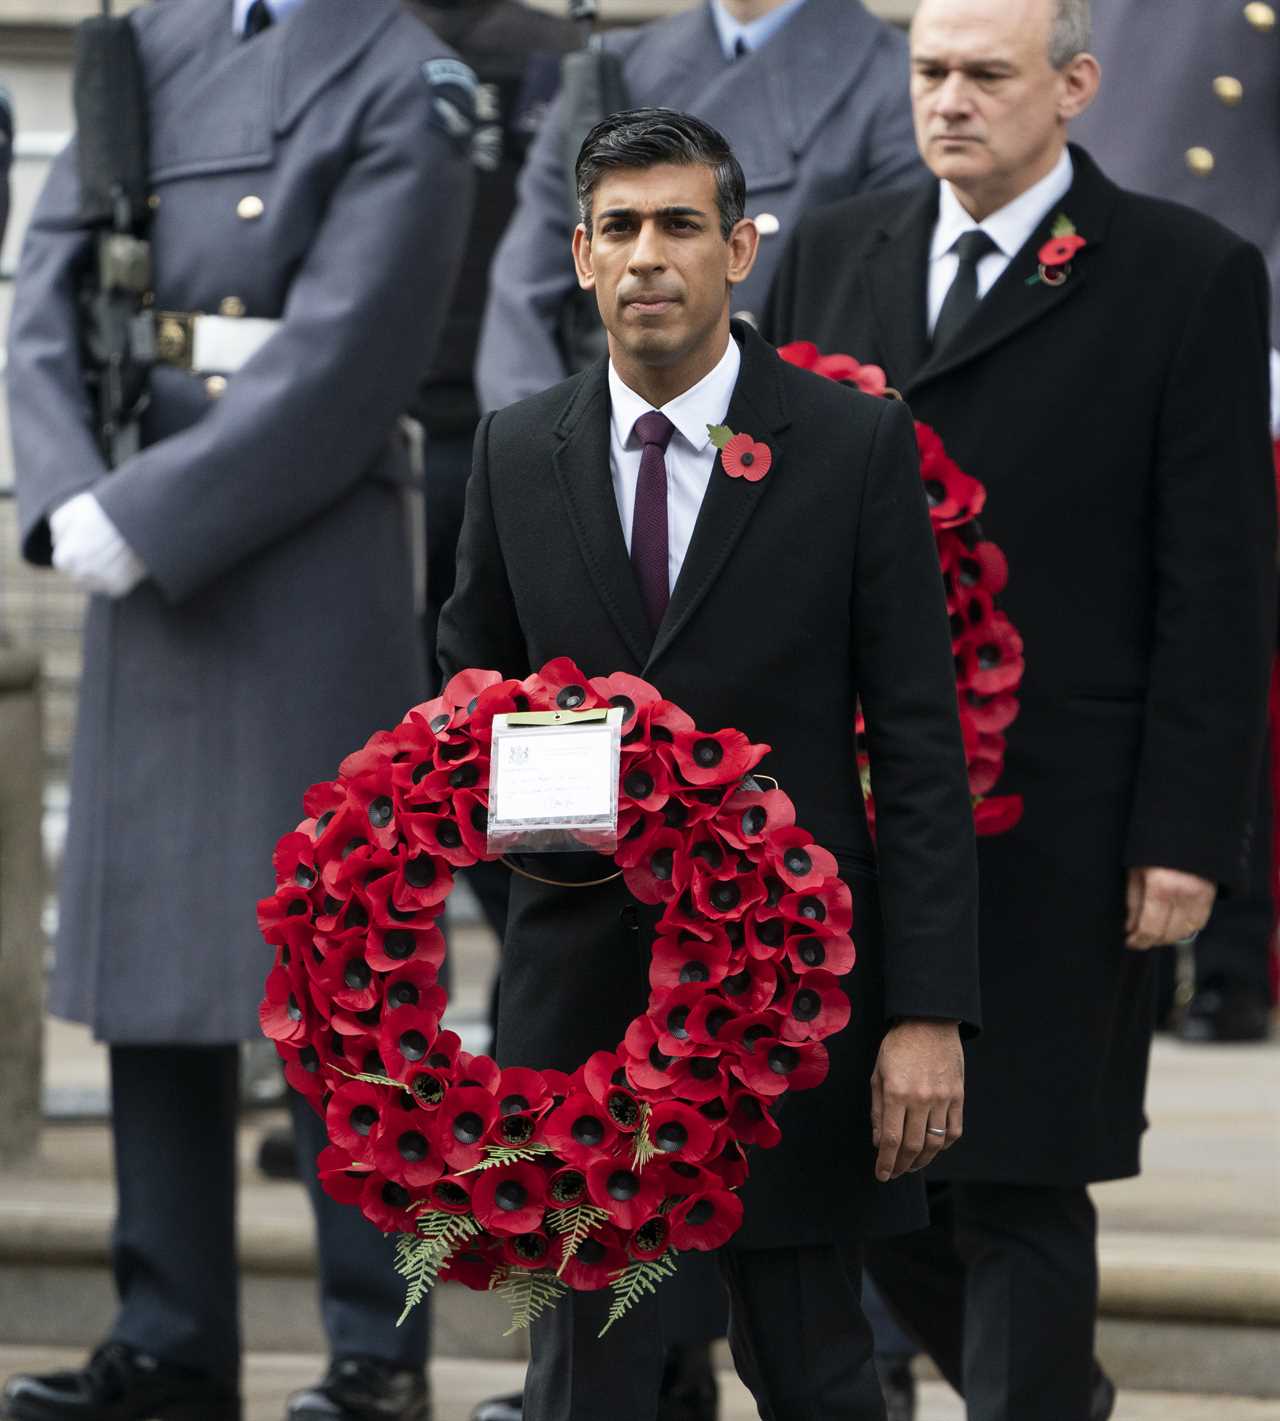 Rishi Sunak and record seven surviving former PMs stood in tribute together at Remembrance Day Service